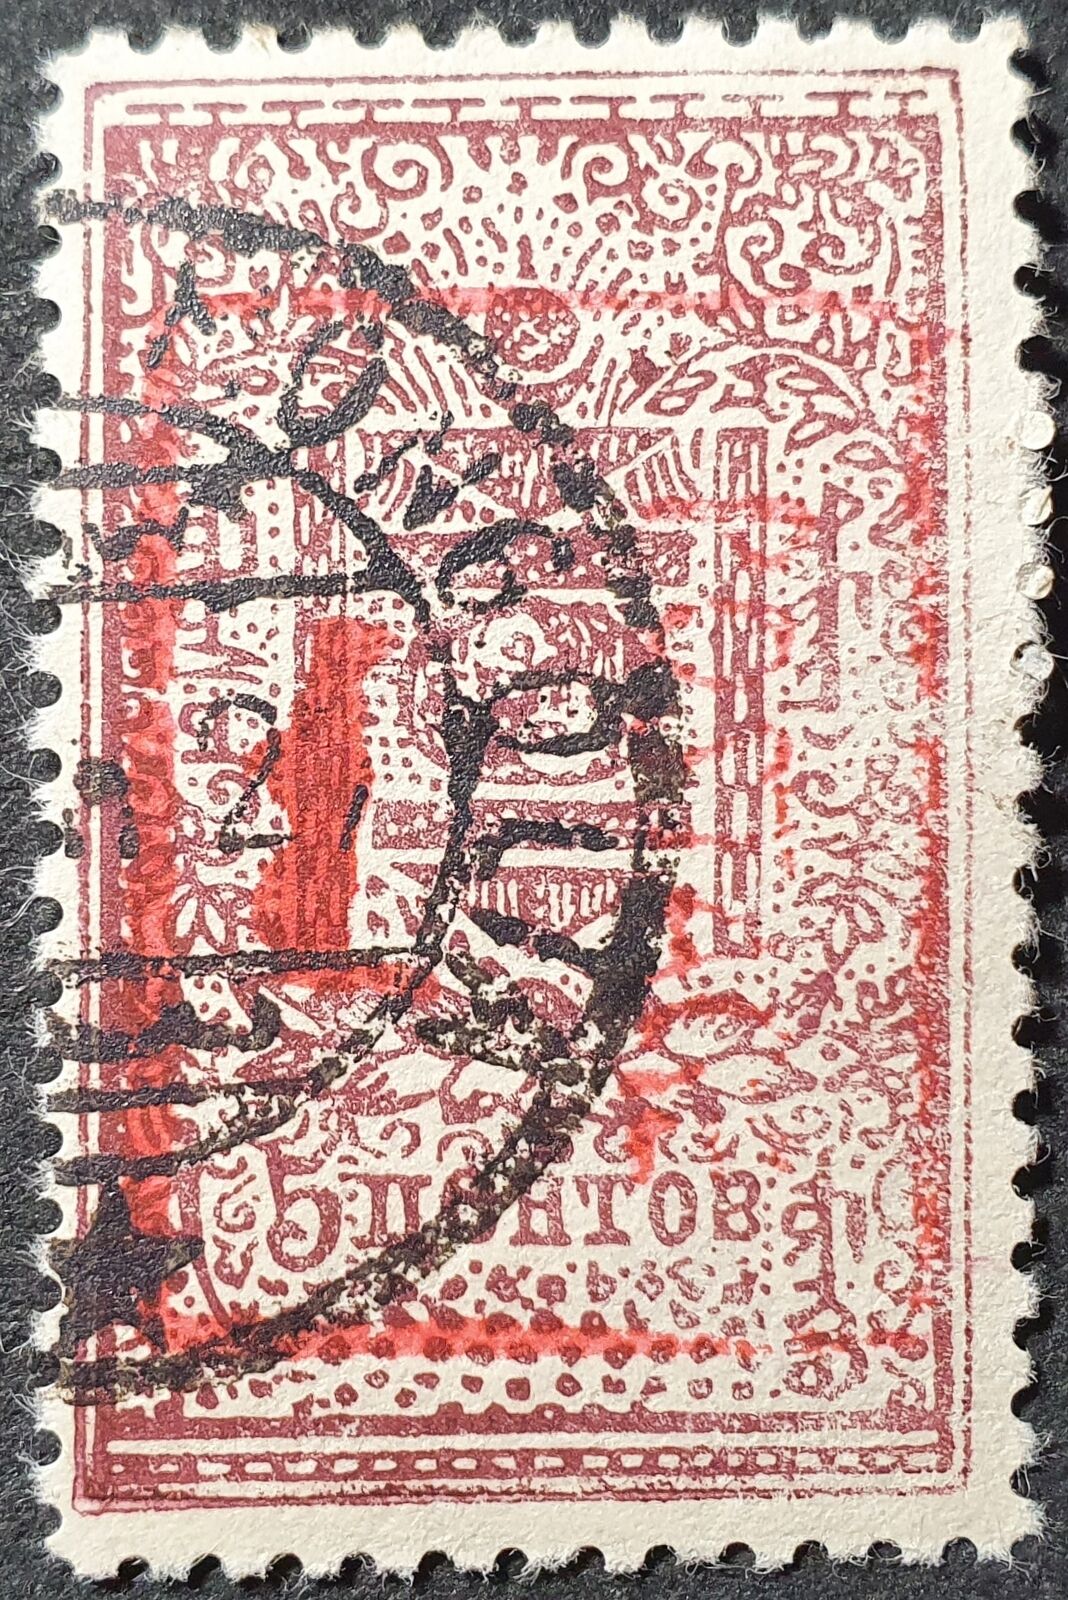 Mongolia 1926 Revenue 5c Overprinted 'postage' In Red, "pongolta" Cancel